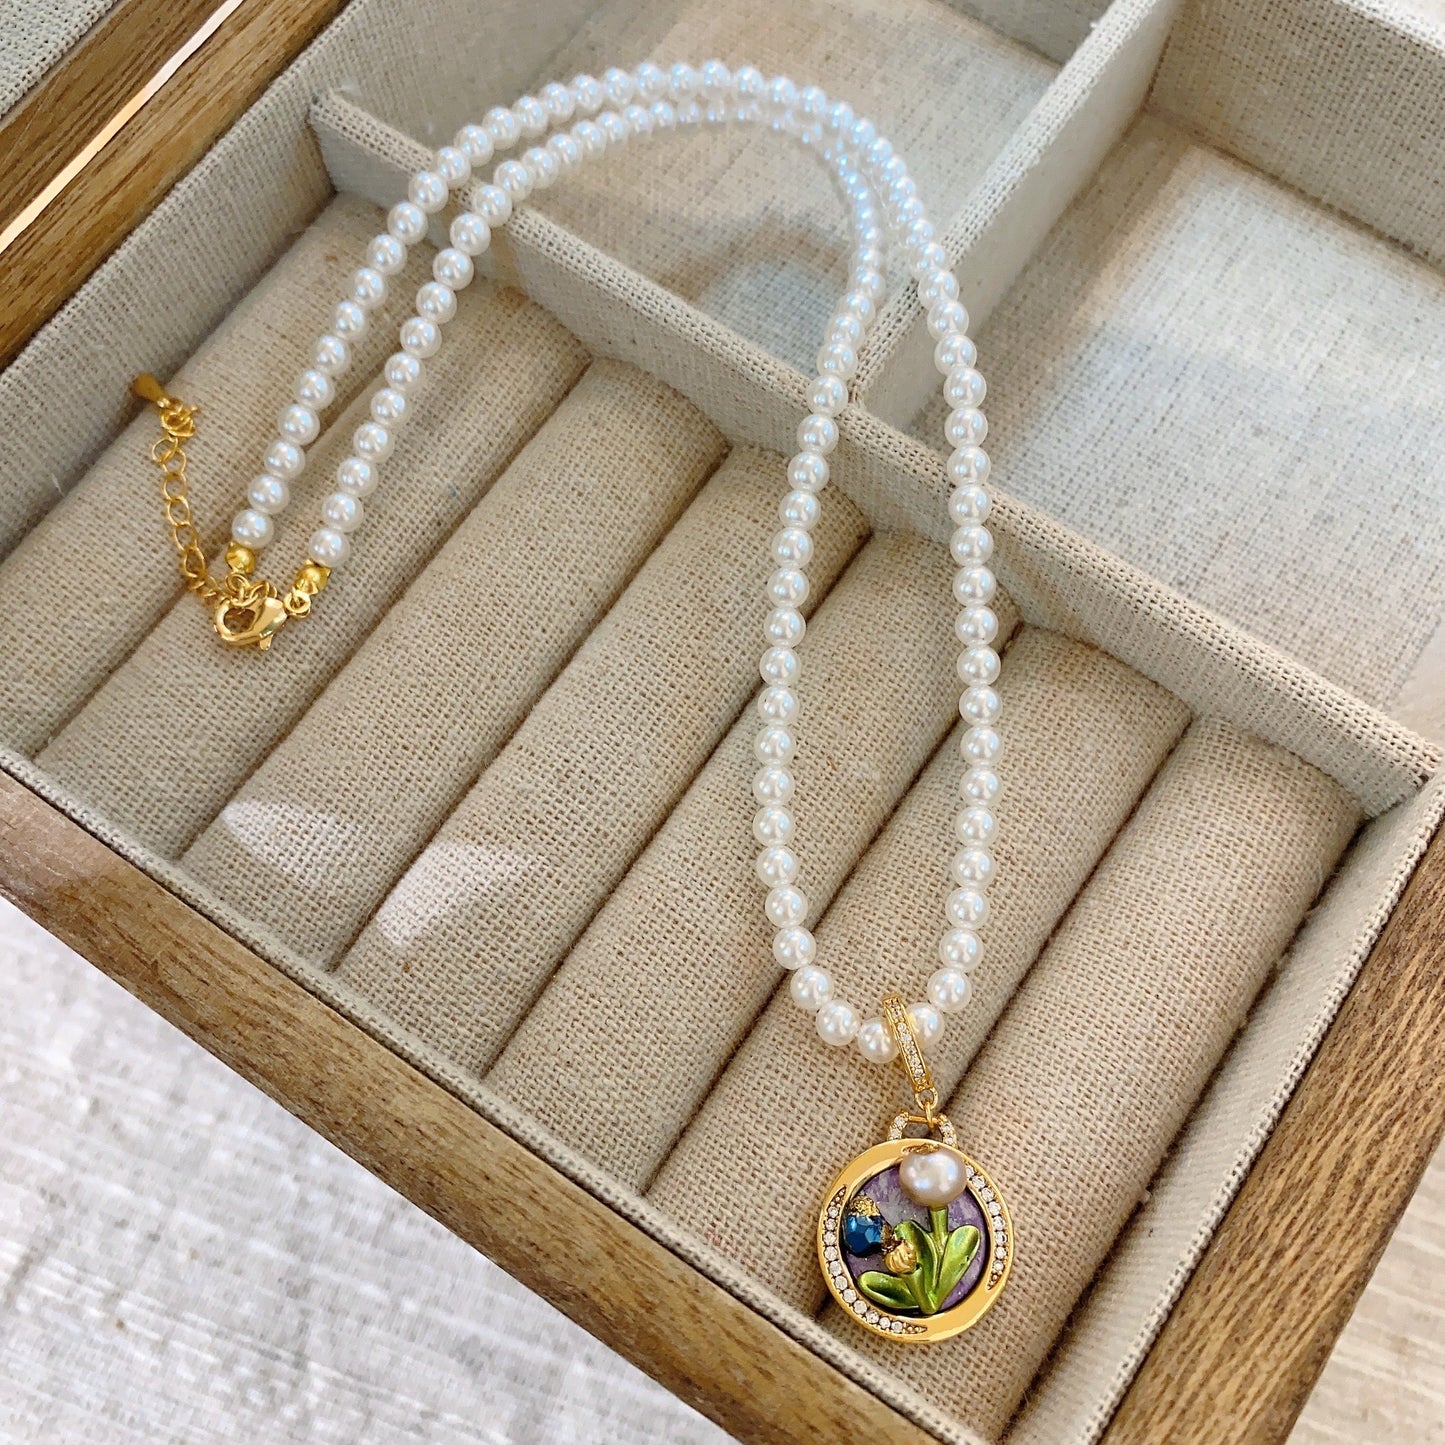 Baroque Pearl Necklace with Freshwater Pearls, Oii Painting Pearl Necklace.